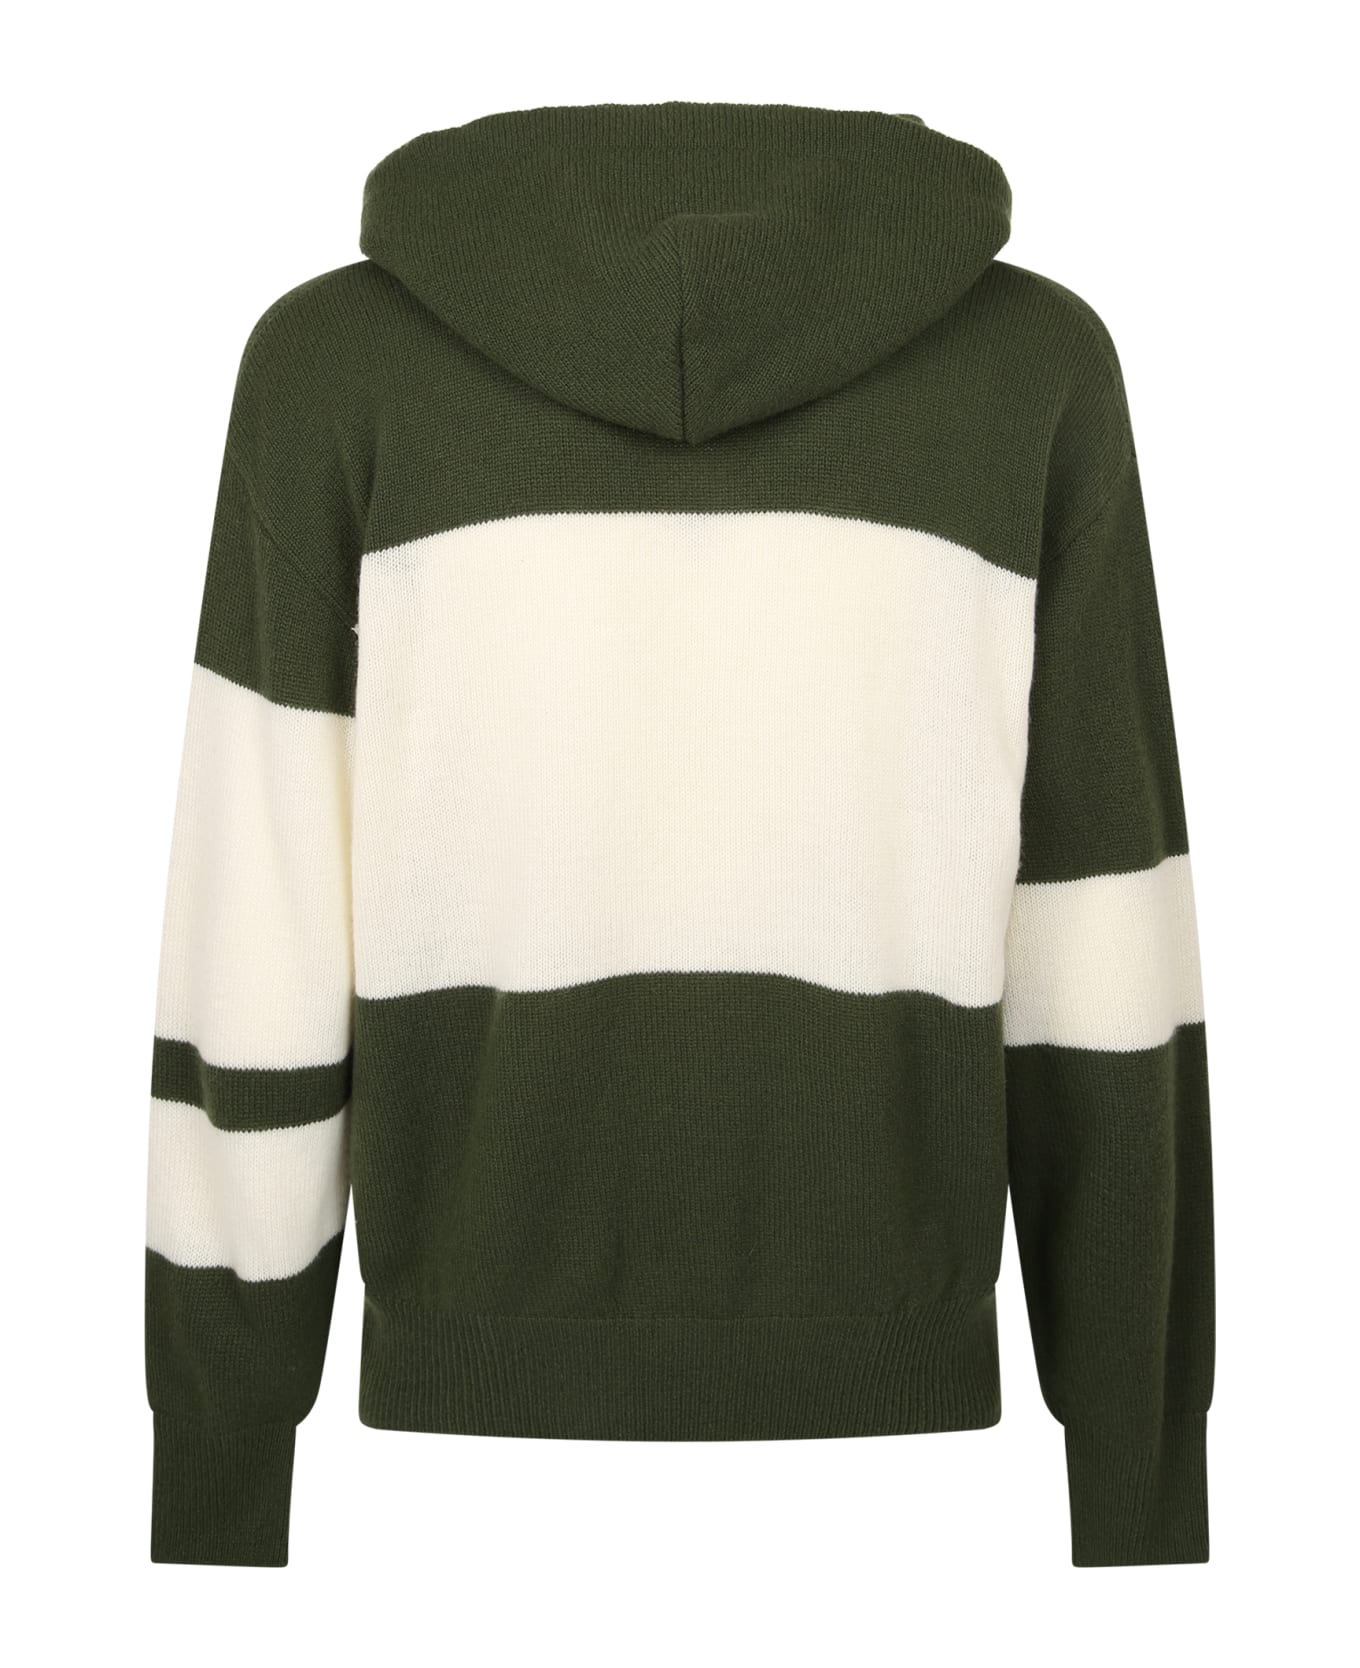 MSGM Relaxed Fit Sweatshirt - Green